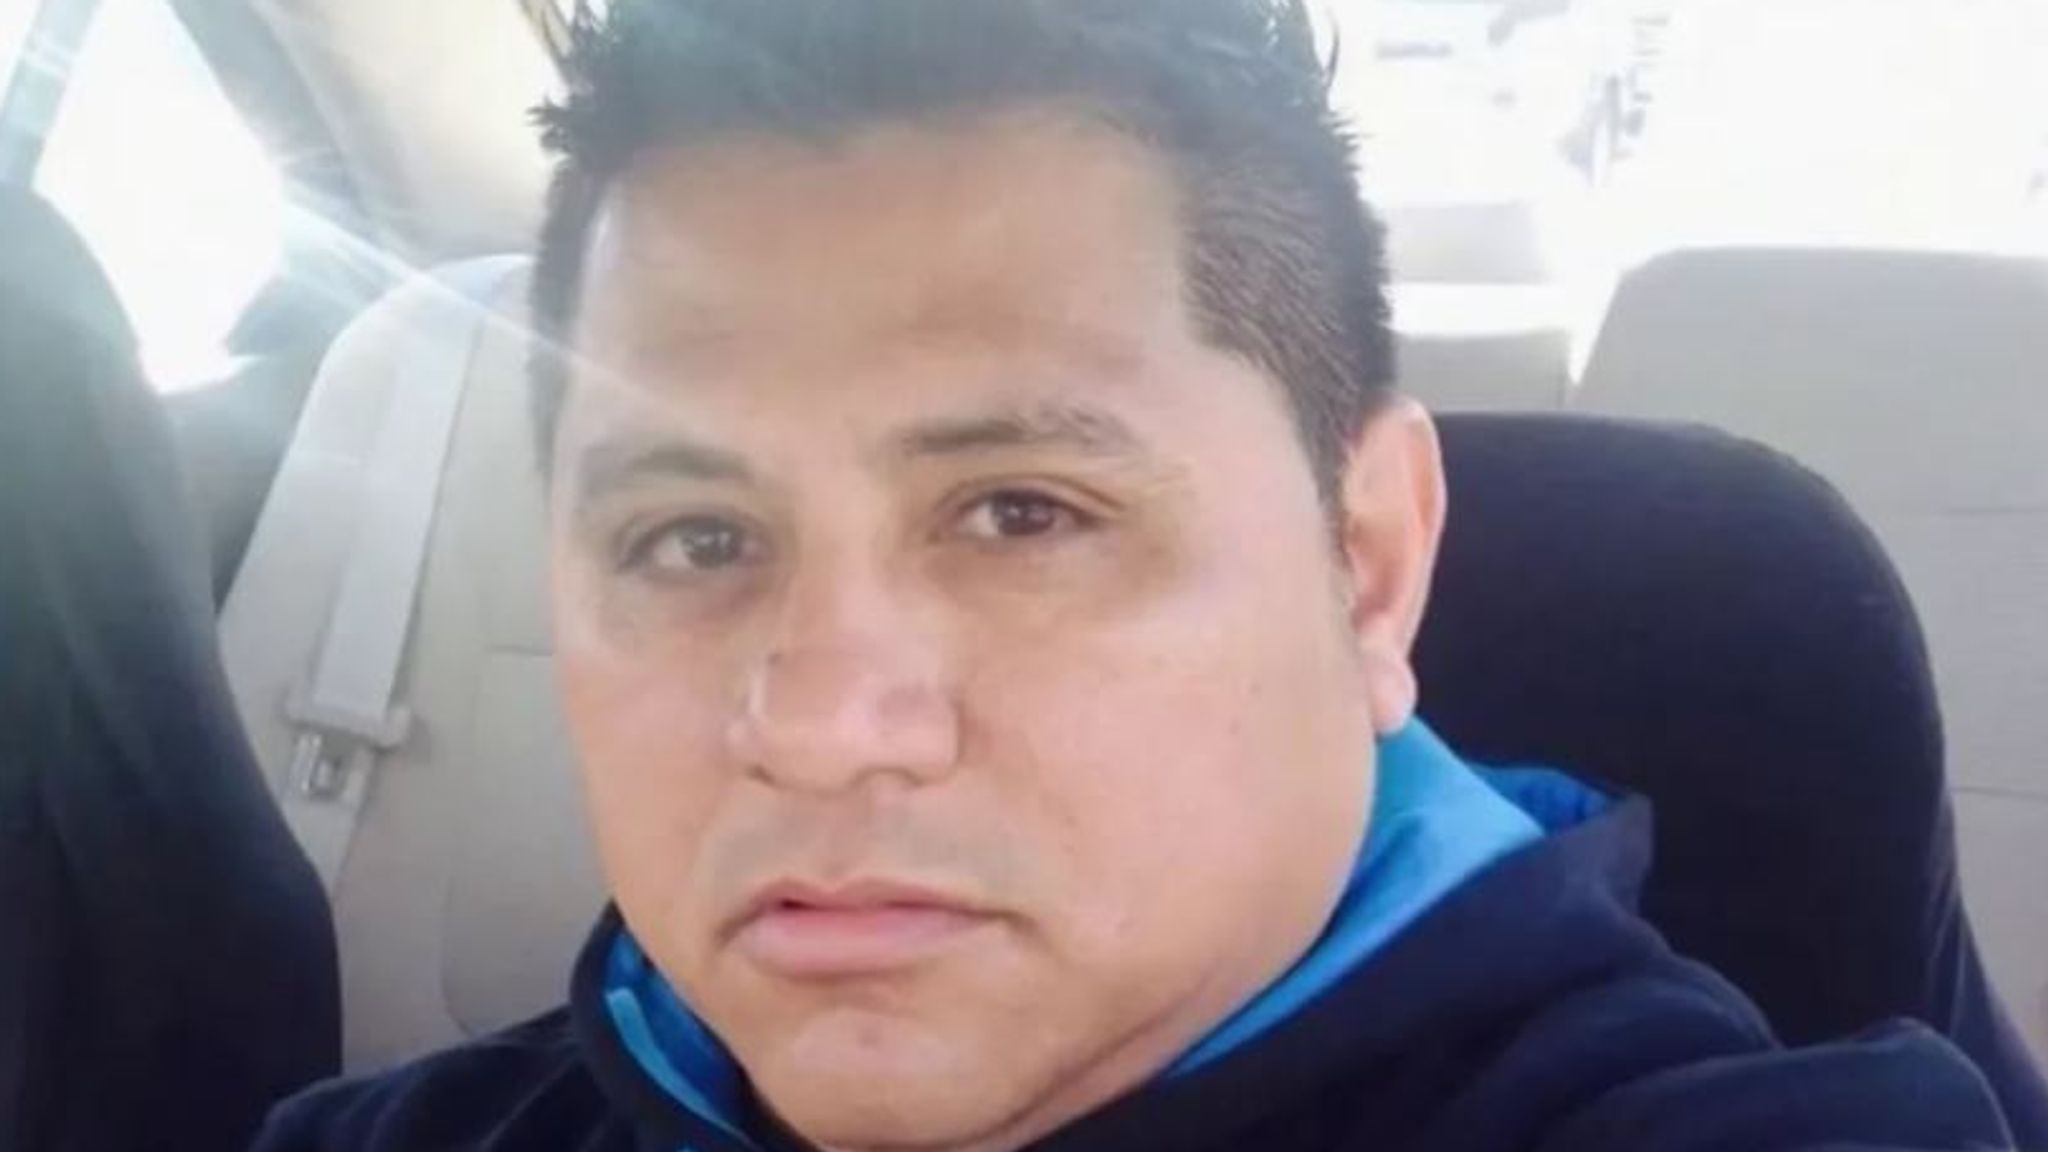 Miguel Luna, a father of three, is reported to have been lost when the bridge collapsed